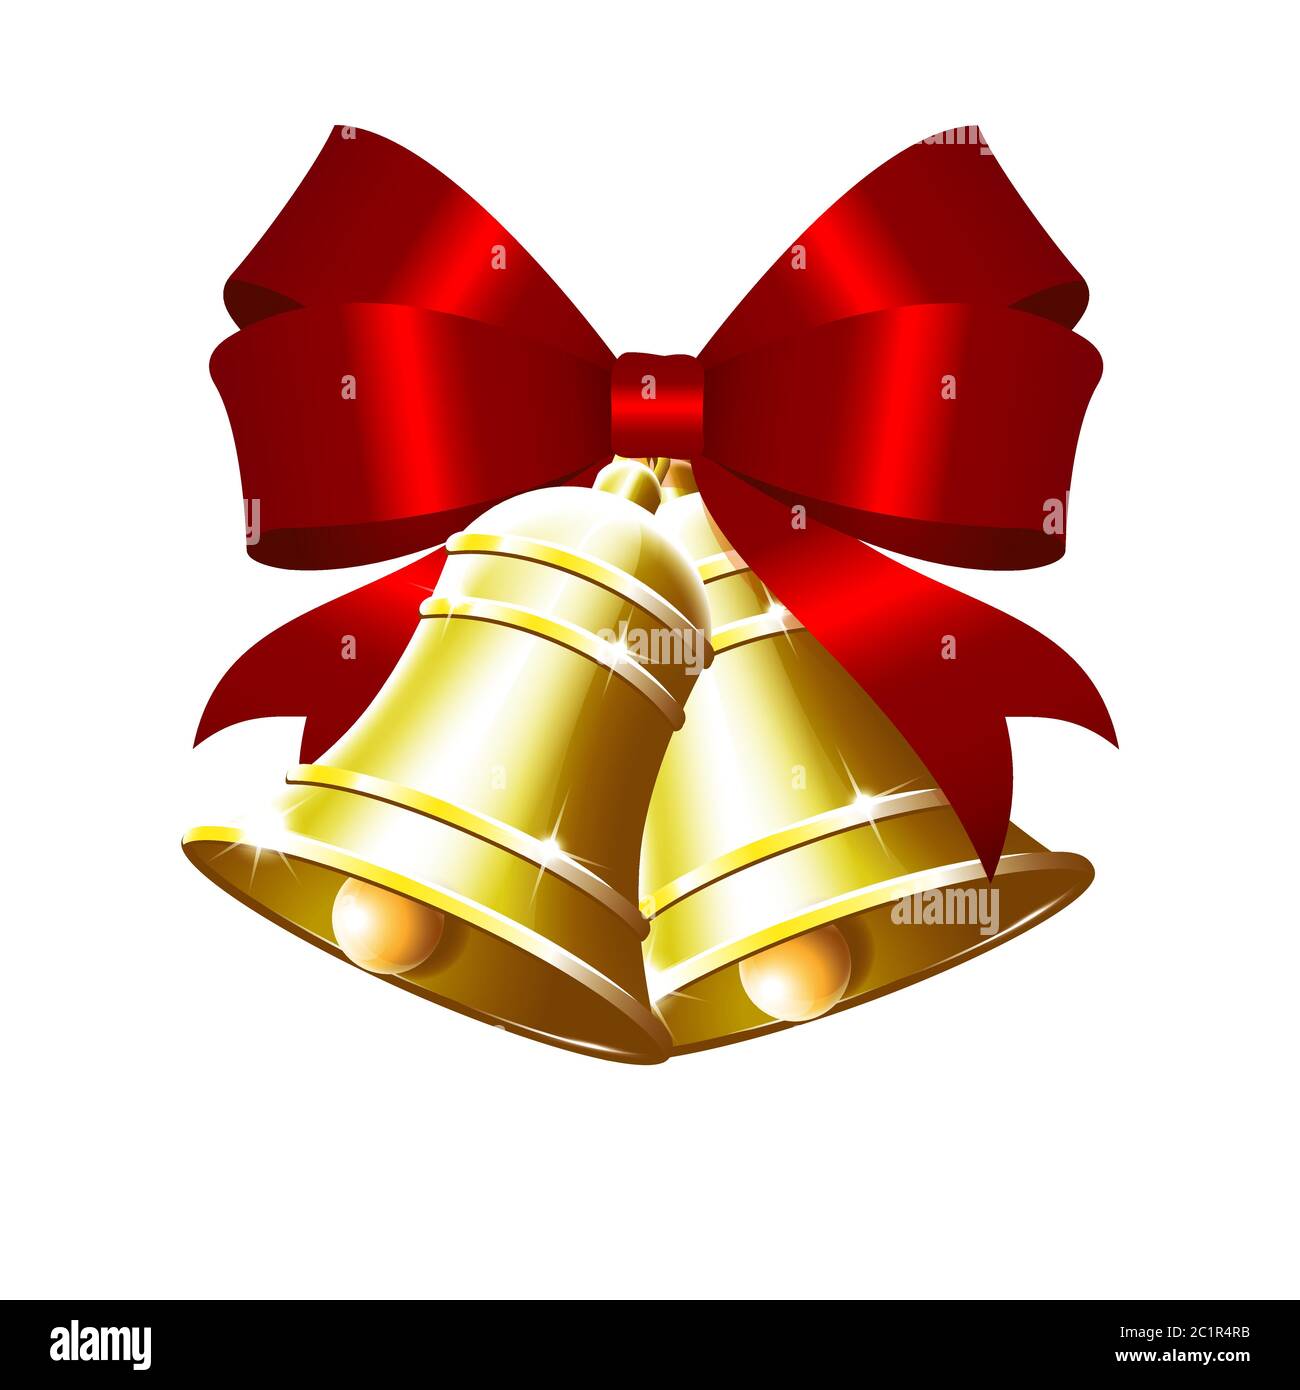 Golden Bells And Red Bow For Christmas Stock Photo - Download